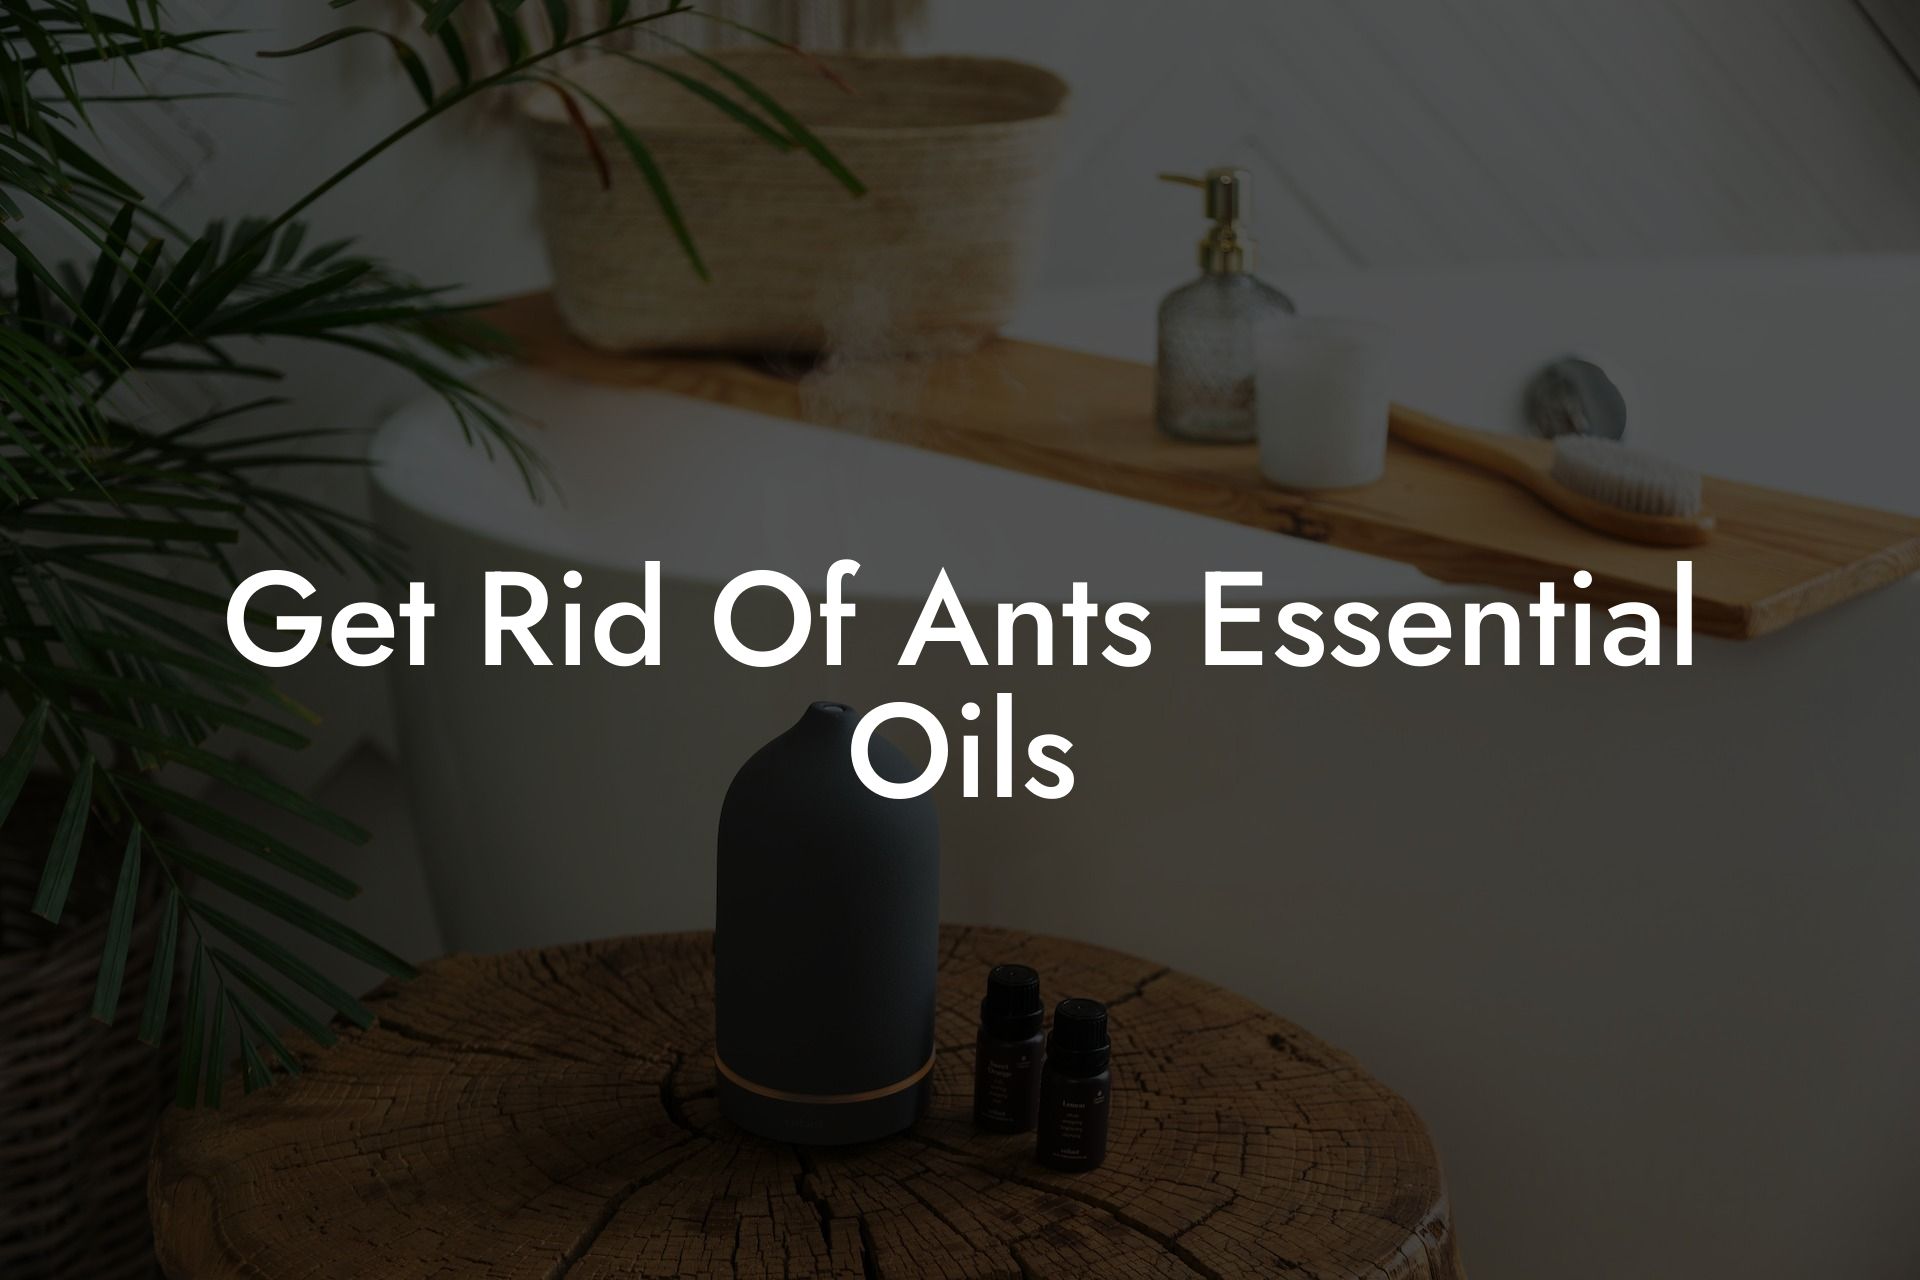 Get Rid Of Ants Essential Oils